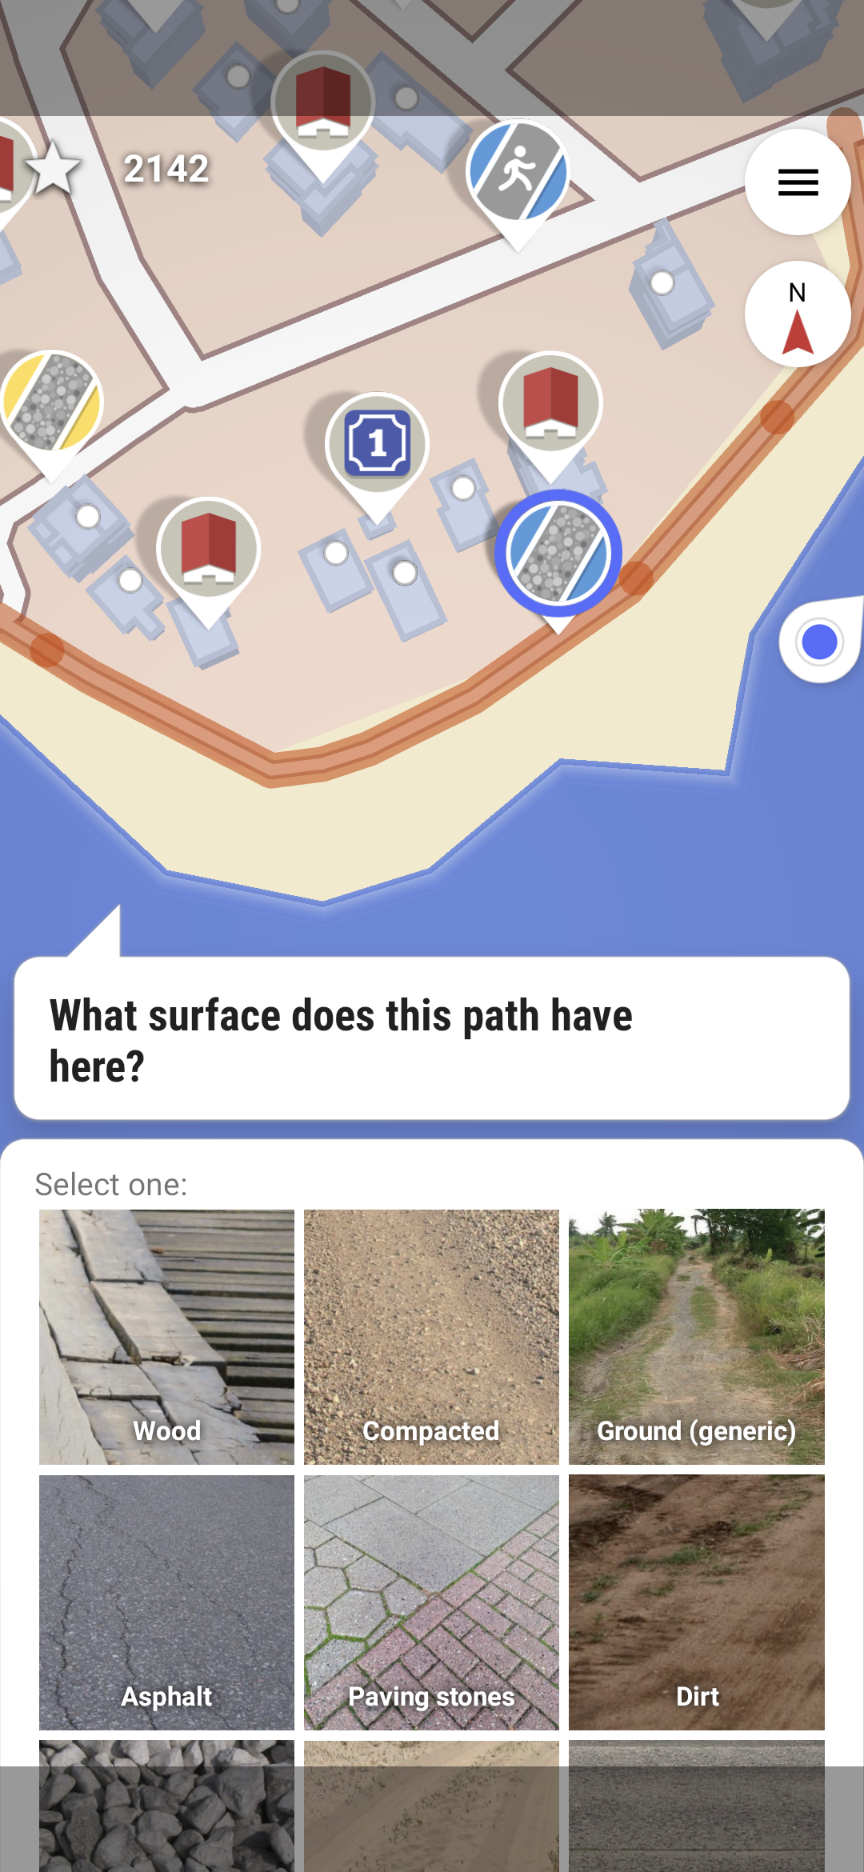 A screenshot of the StreetComplete app